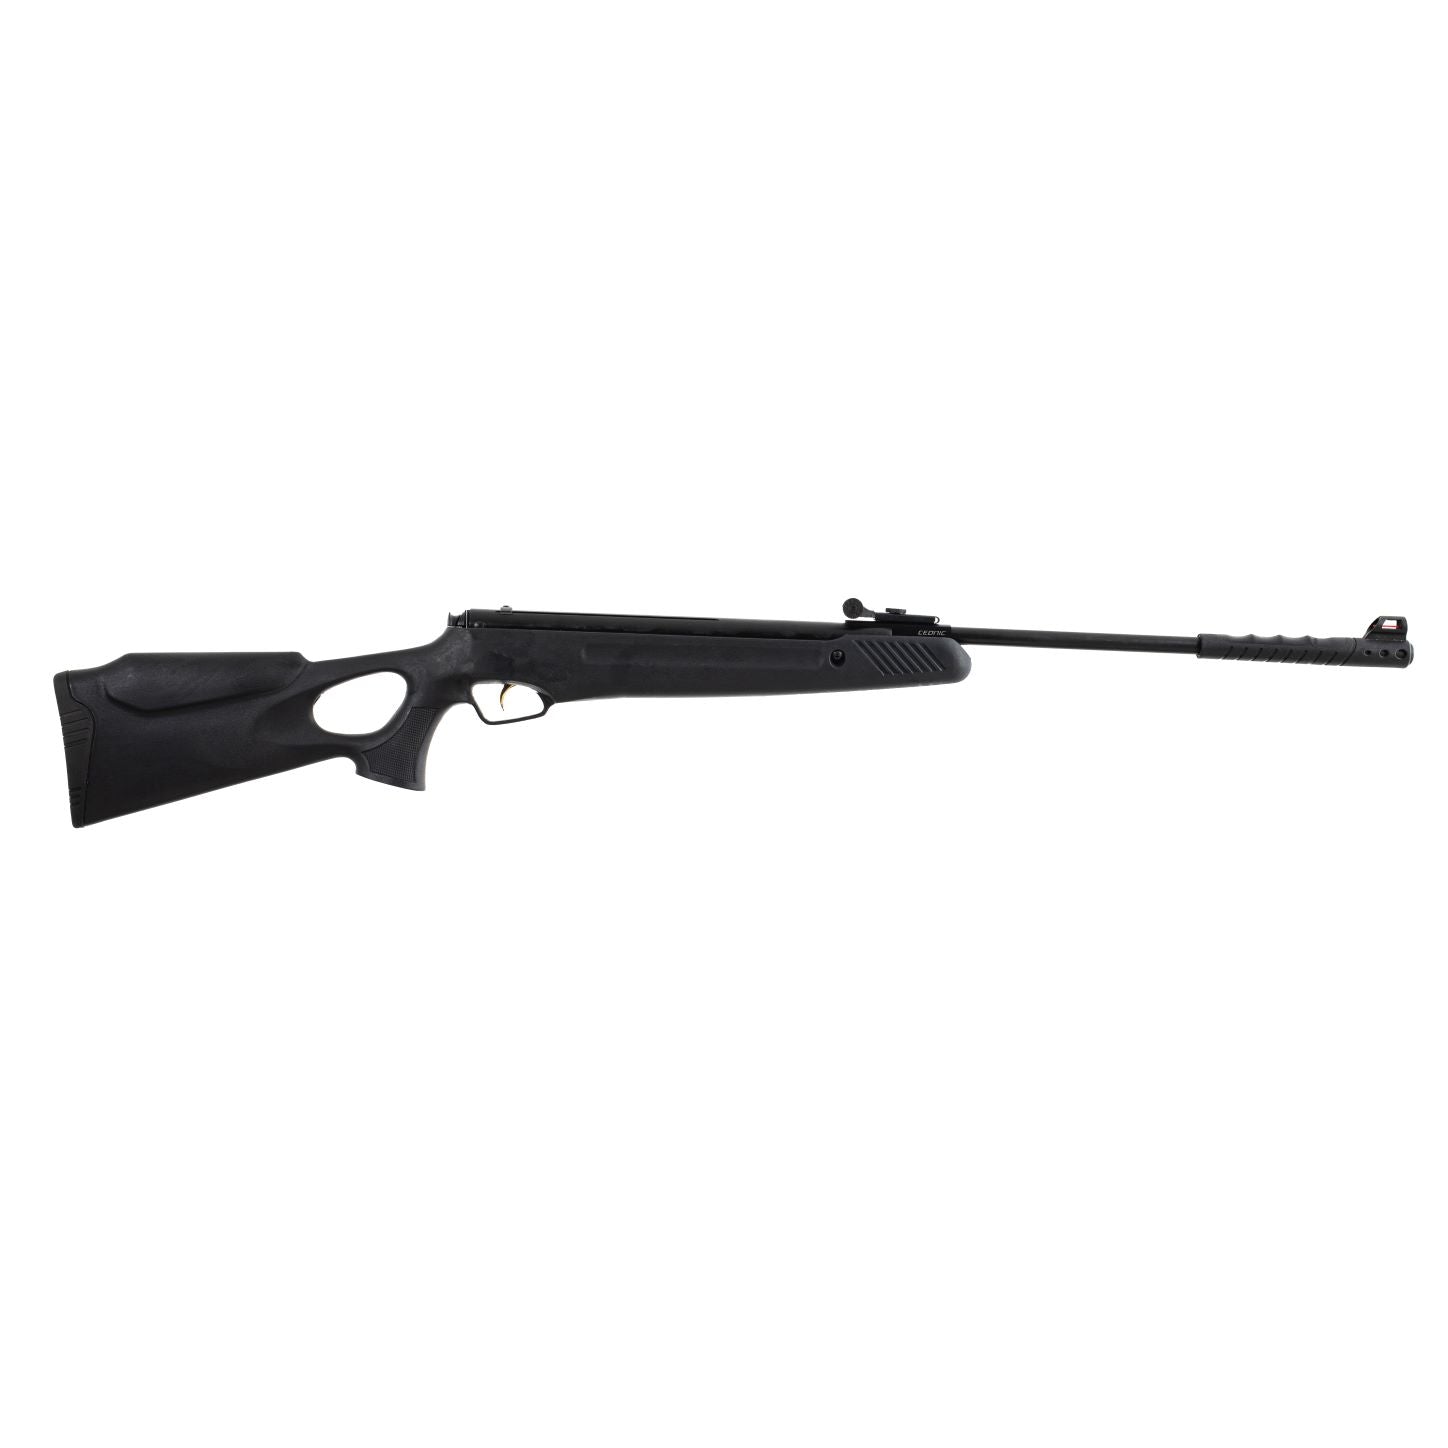 Right side view of a black Ceonic 2050 Spring Piston Air Rifle 